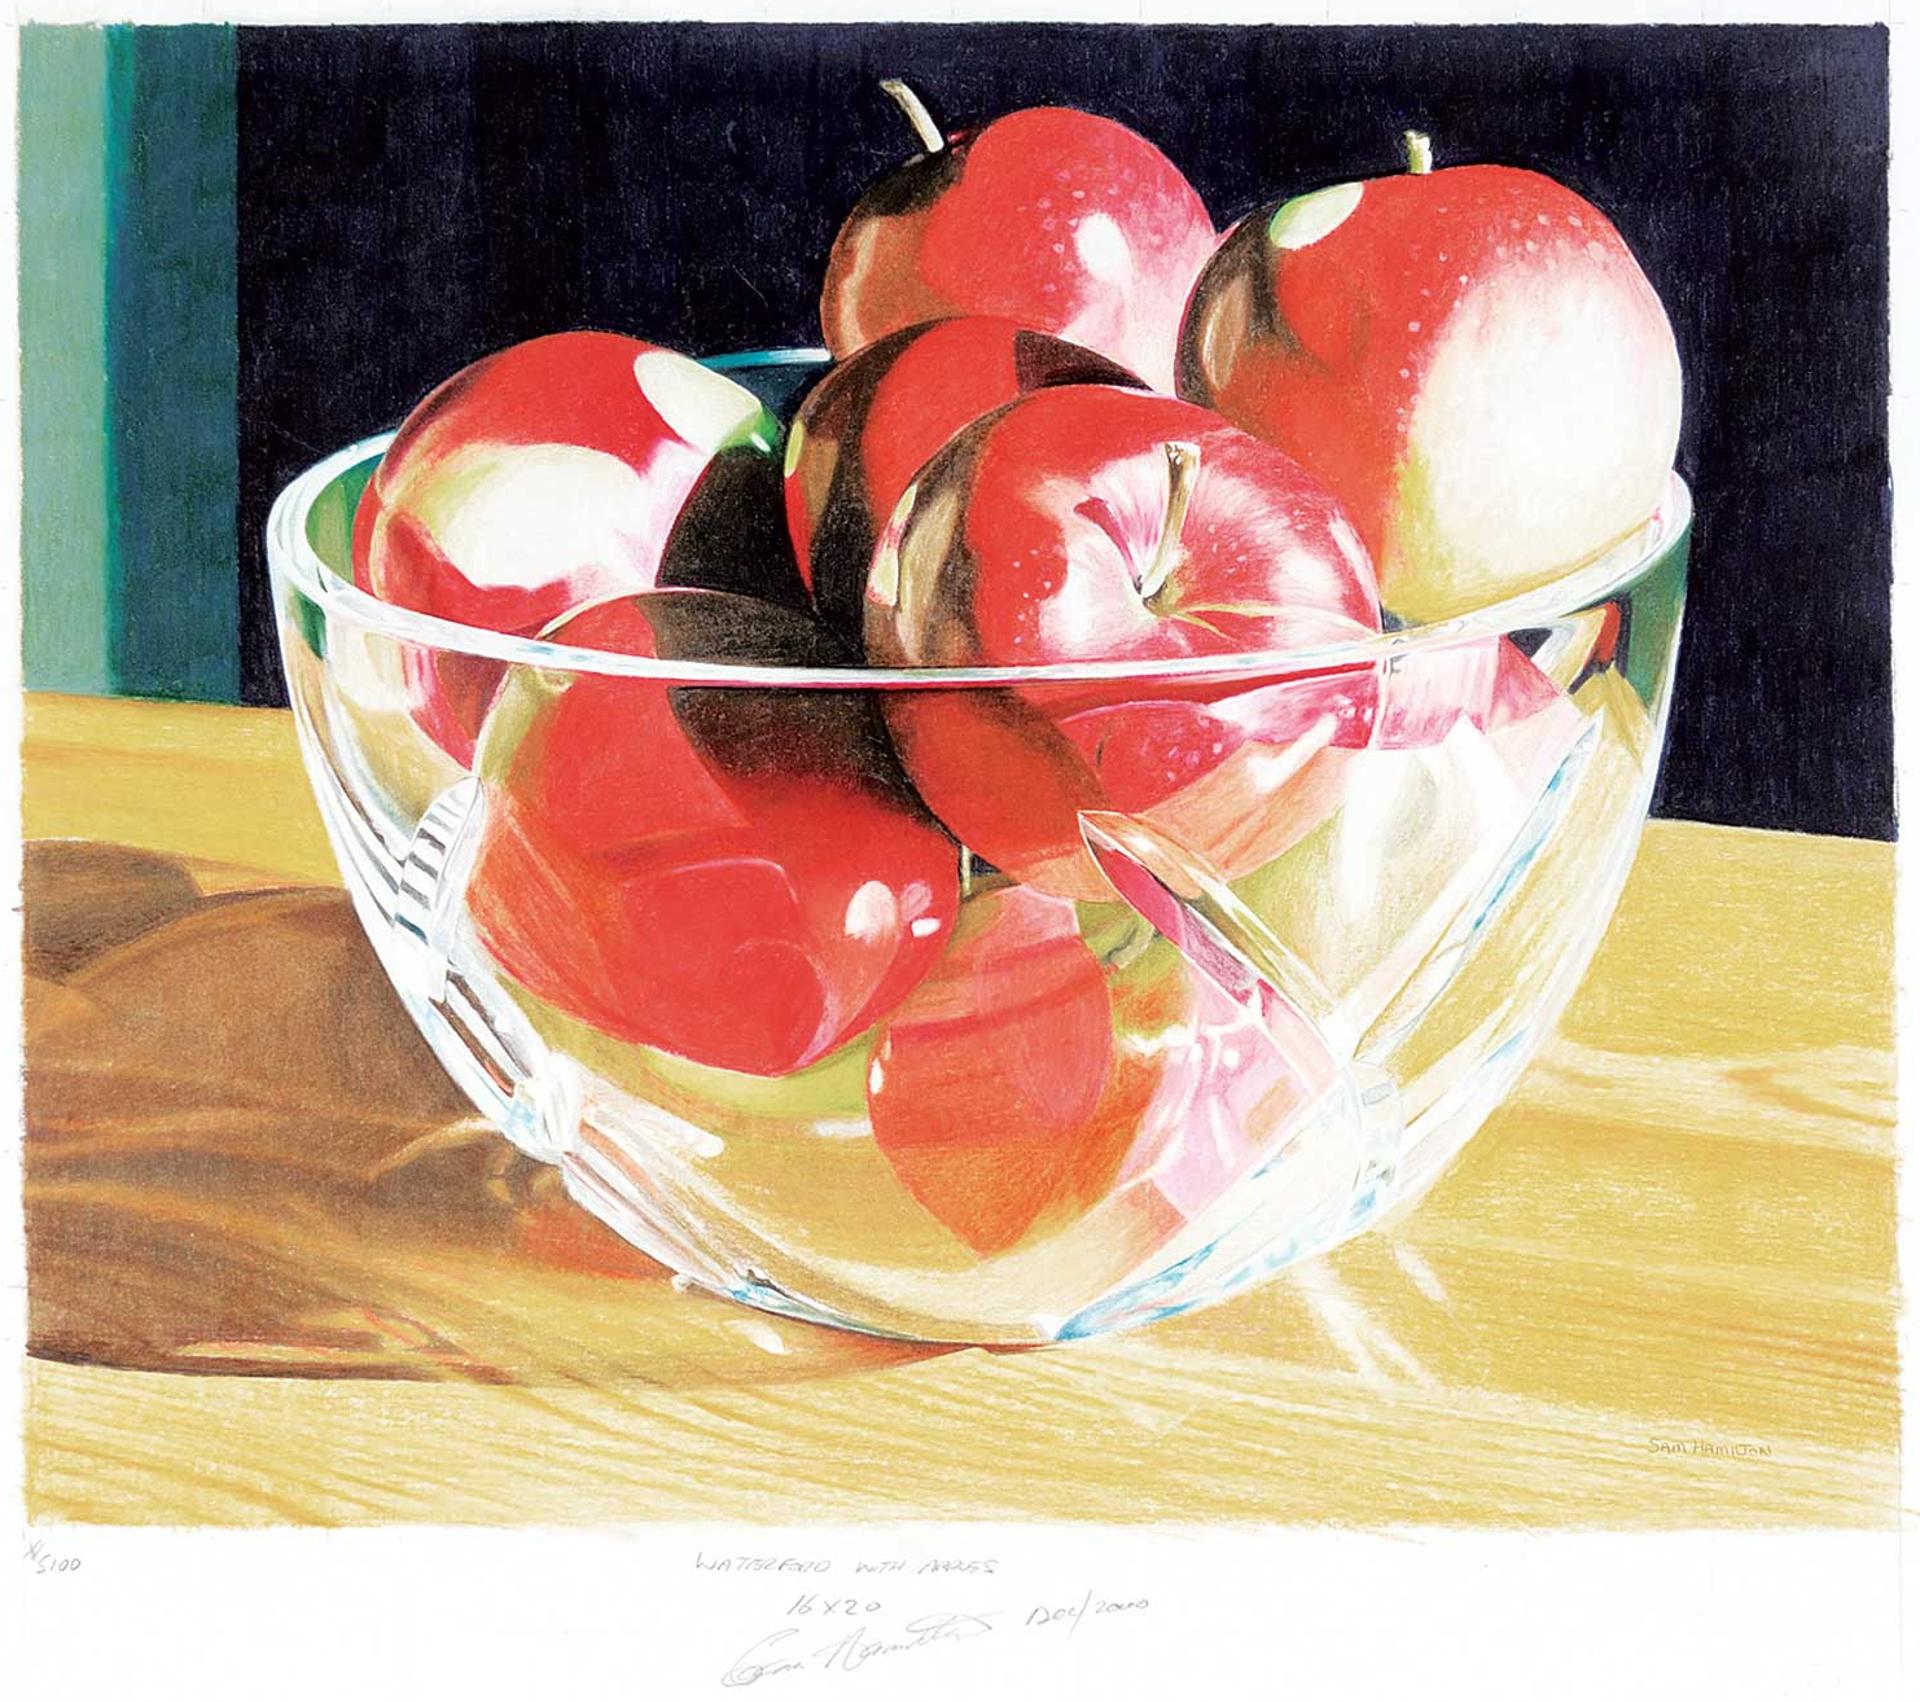 Sam Hamilton (1952) - Waterford with Apples